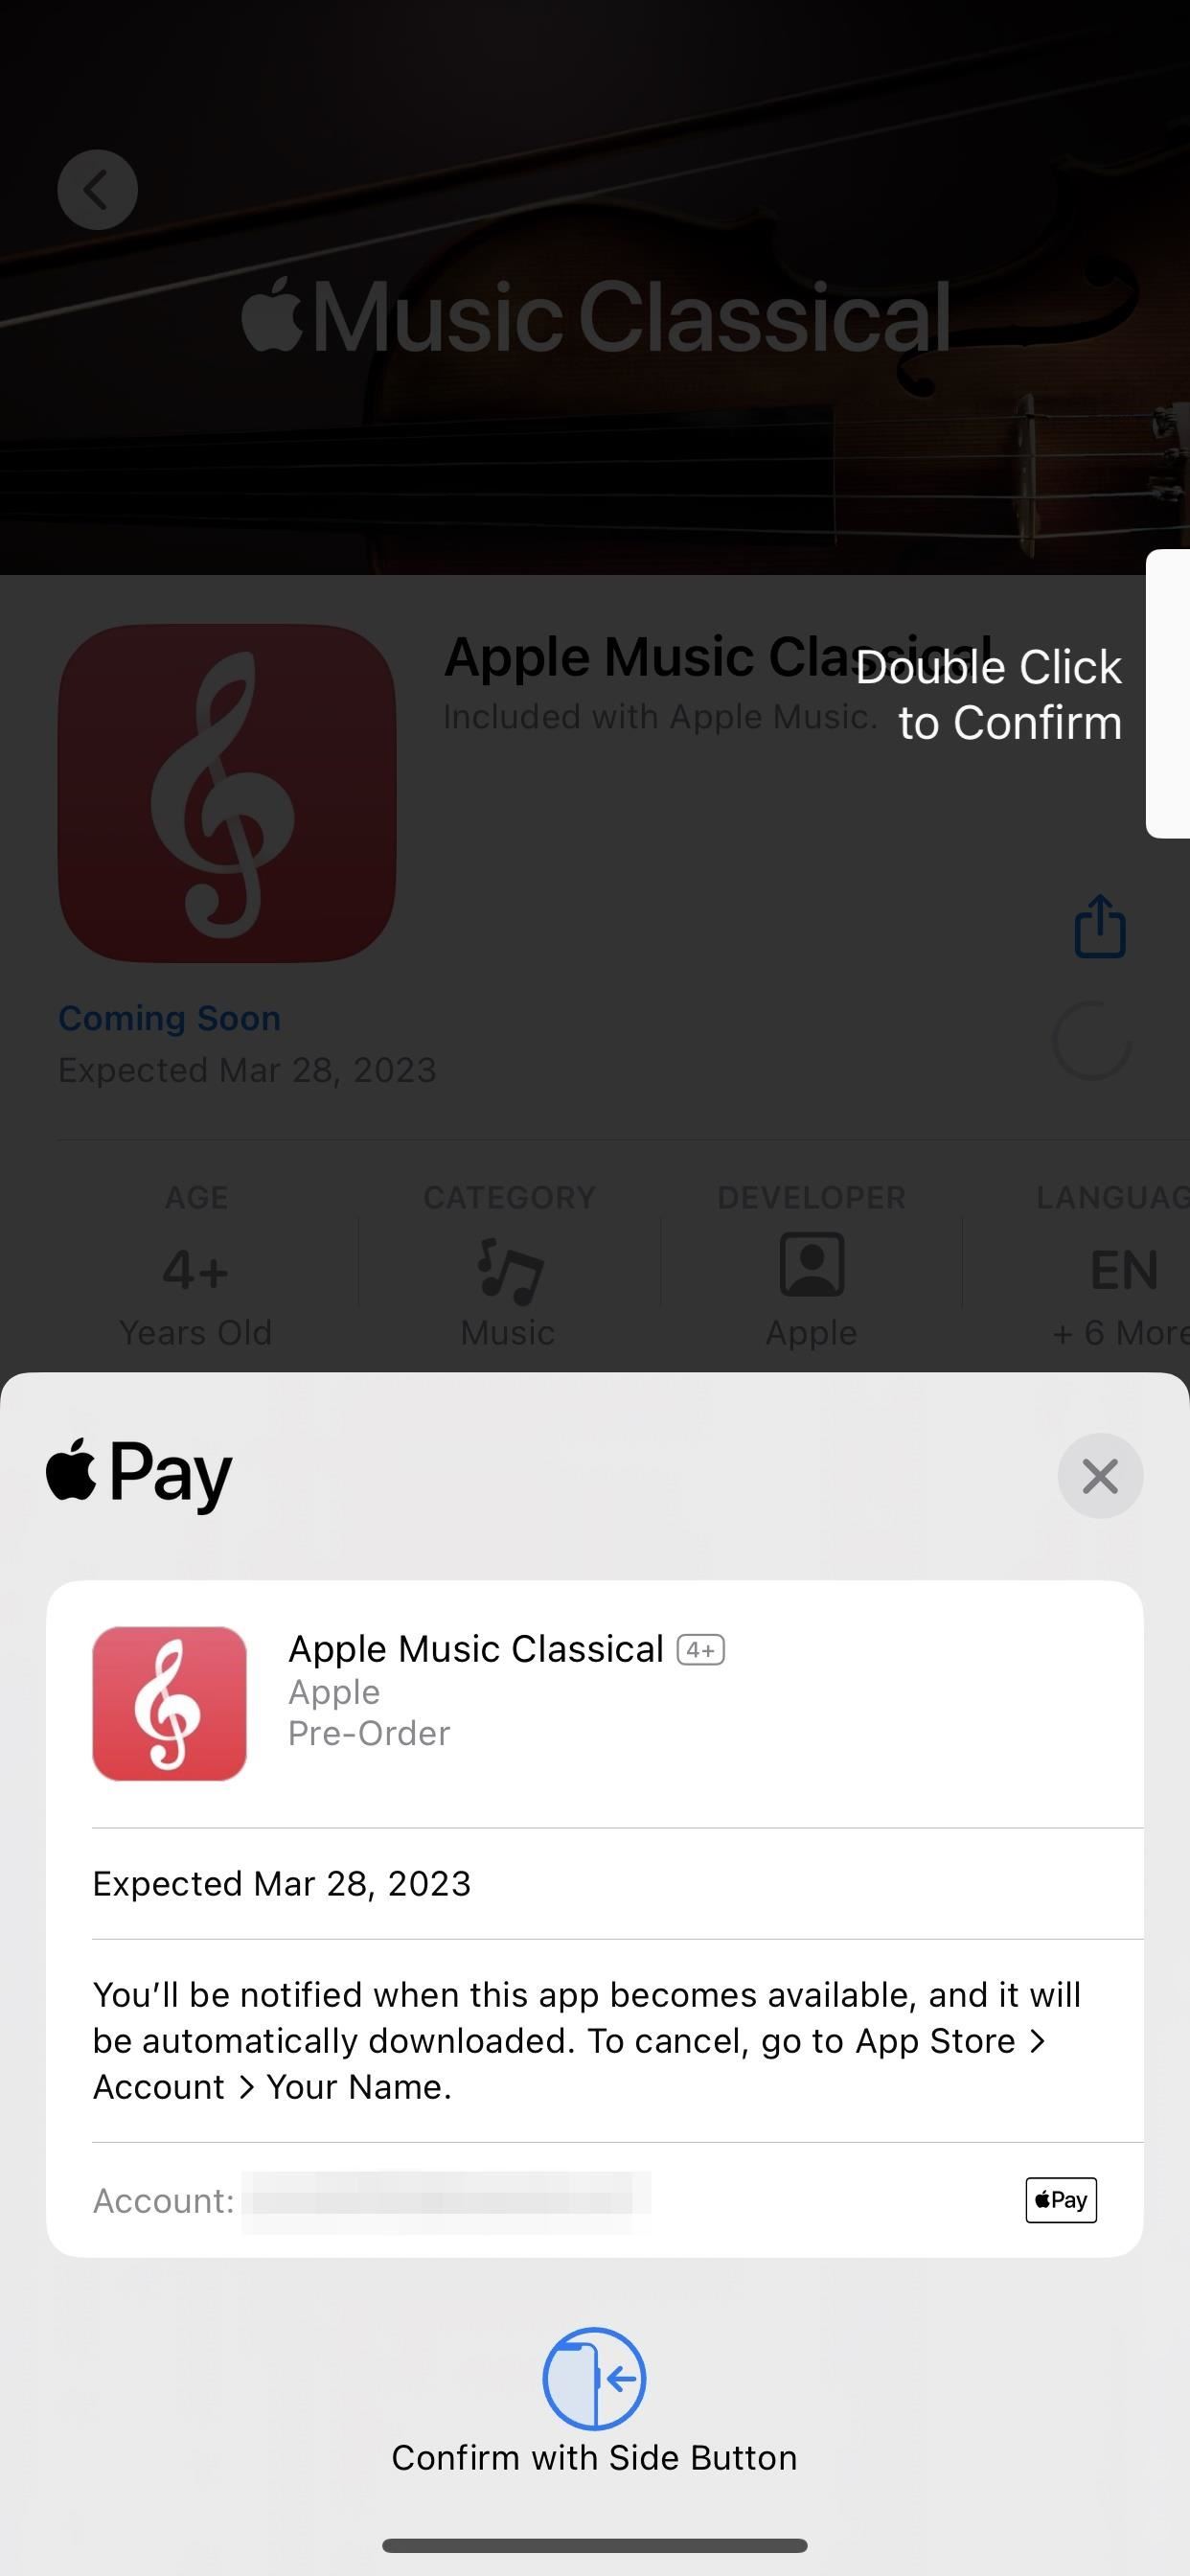 Apple Music Is Adding a Huge New Feature Next Week